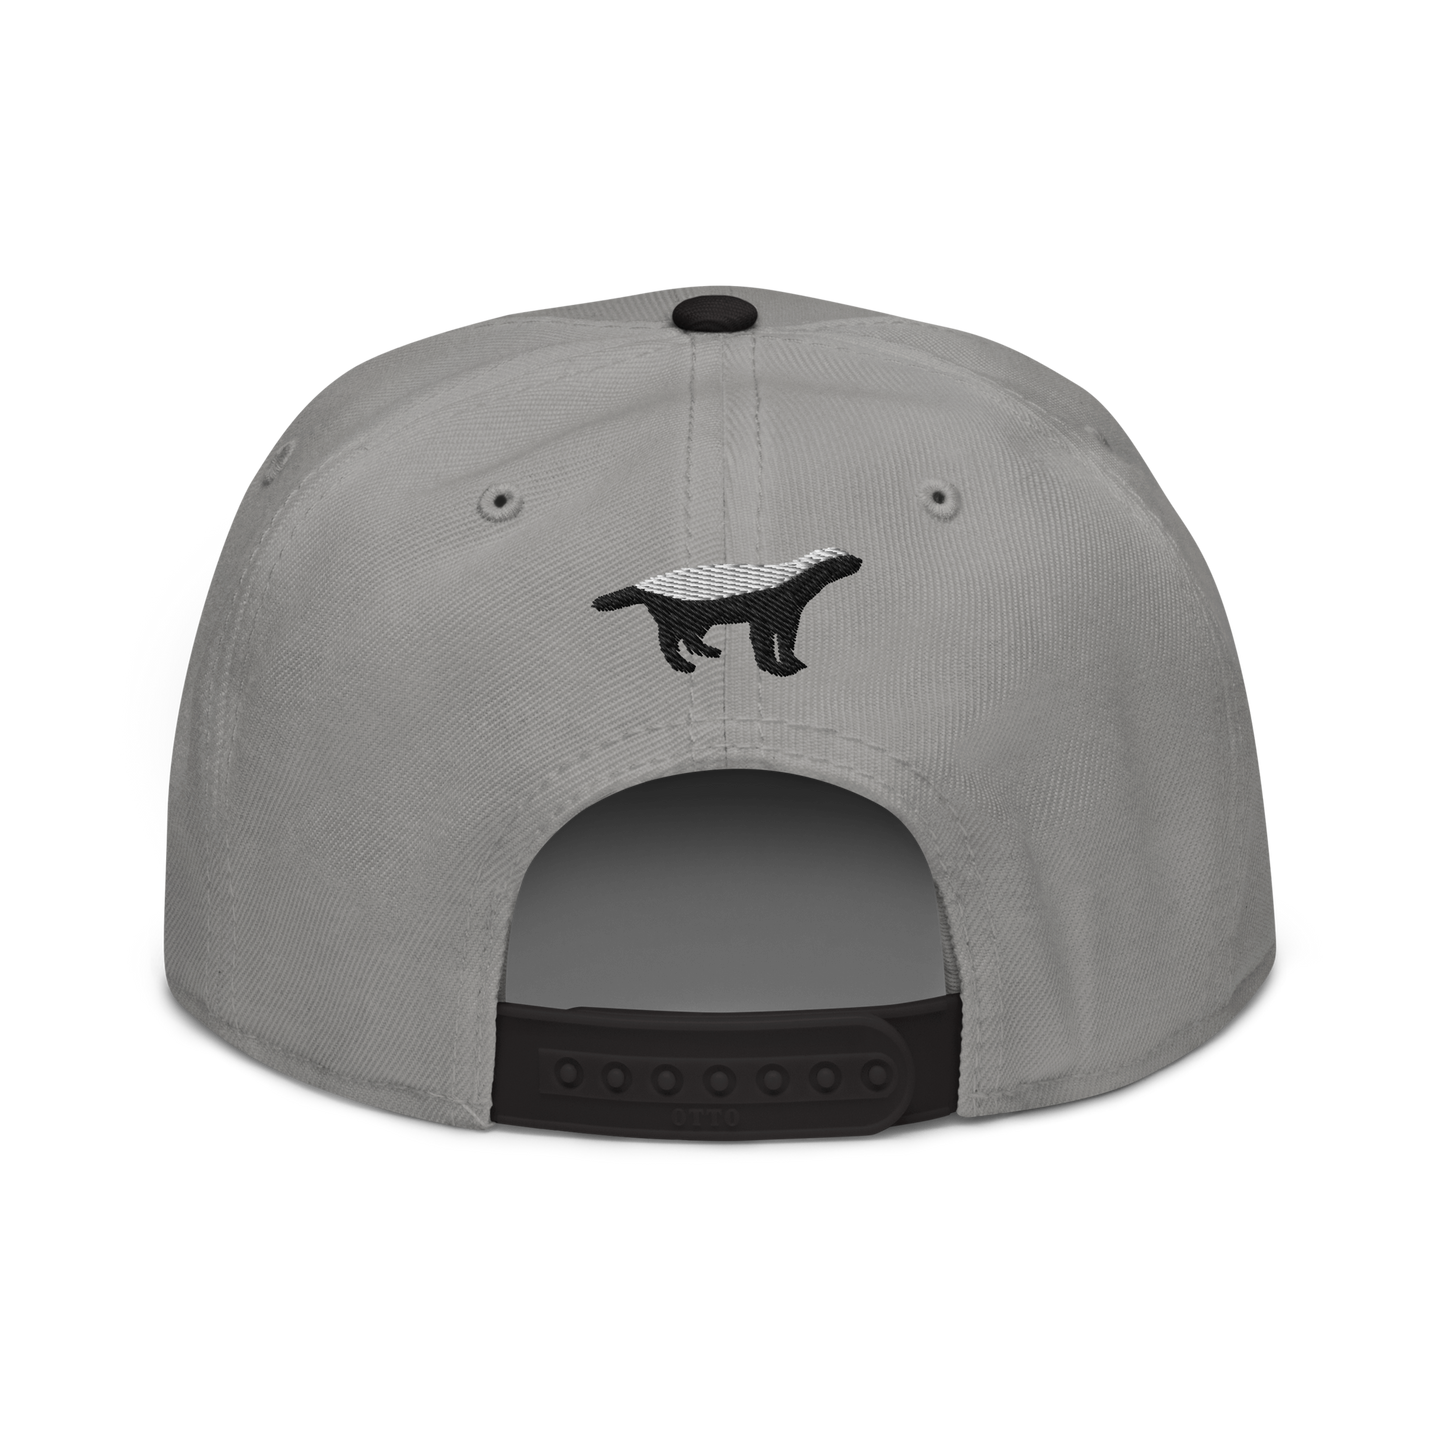 Back view of a grey and black bitcoin snapback hat.